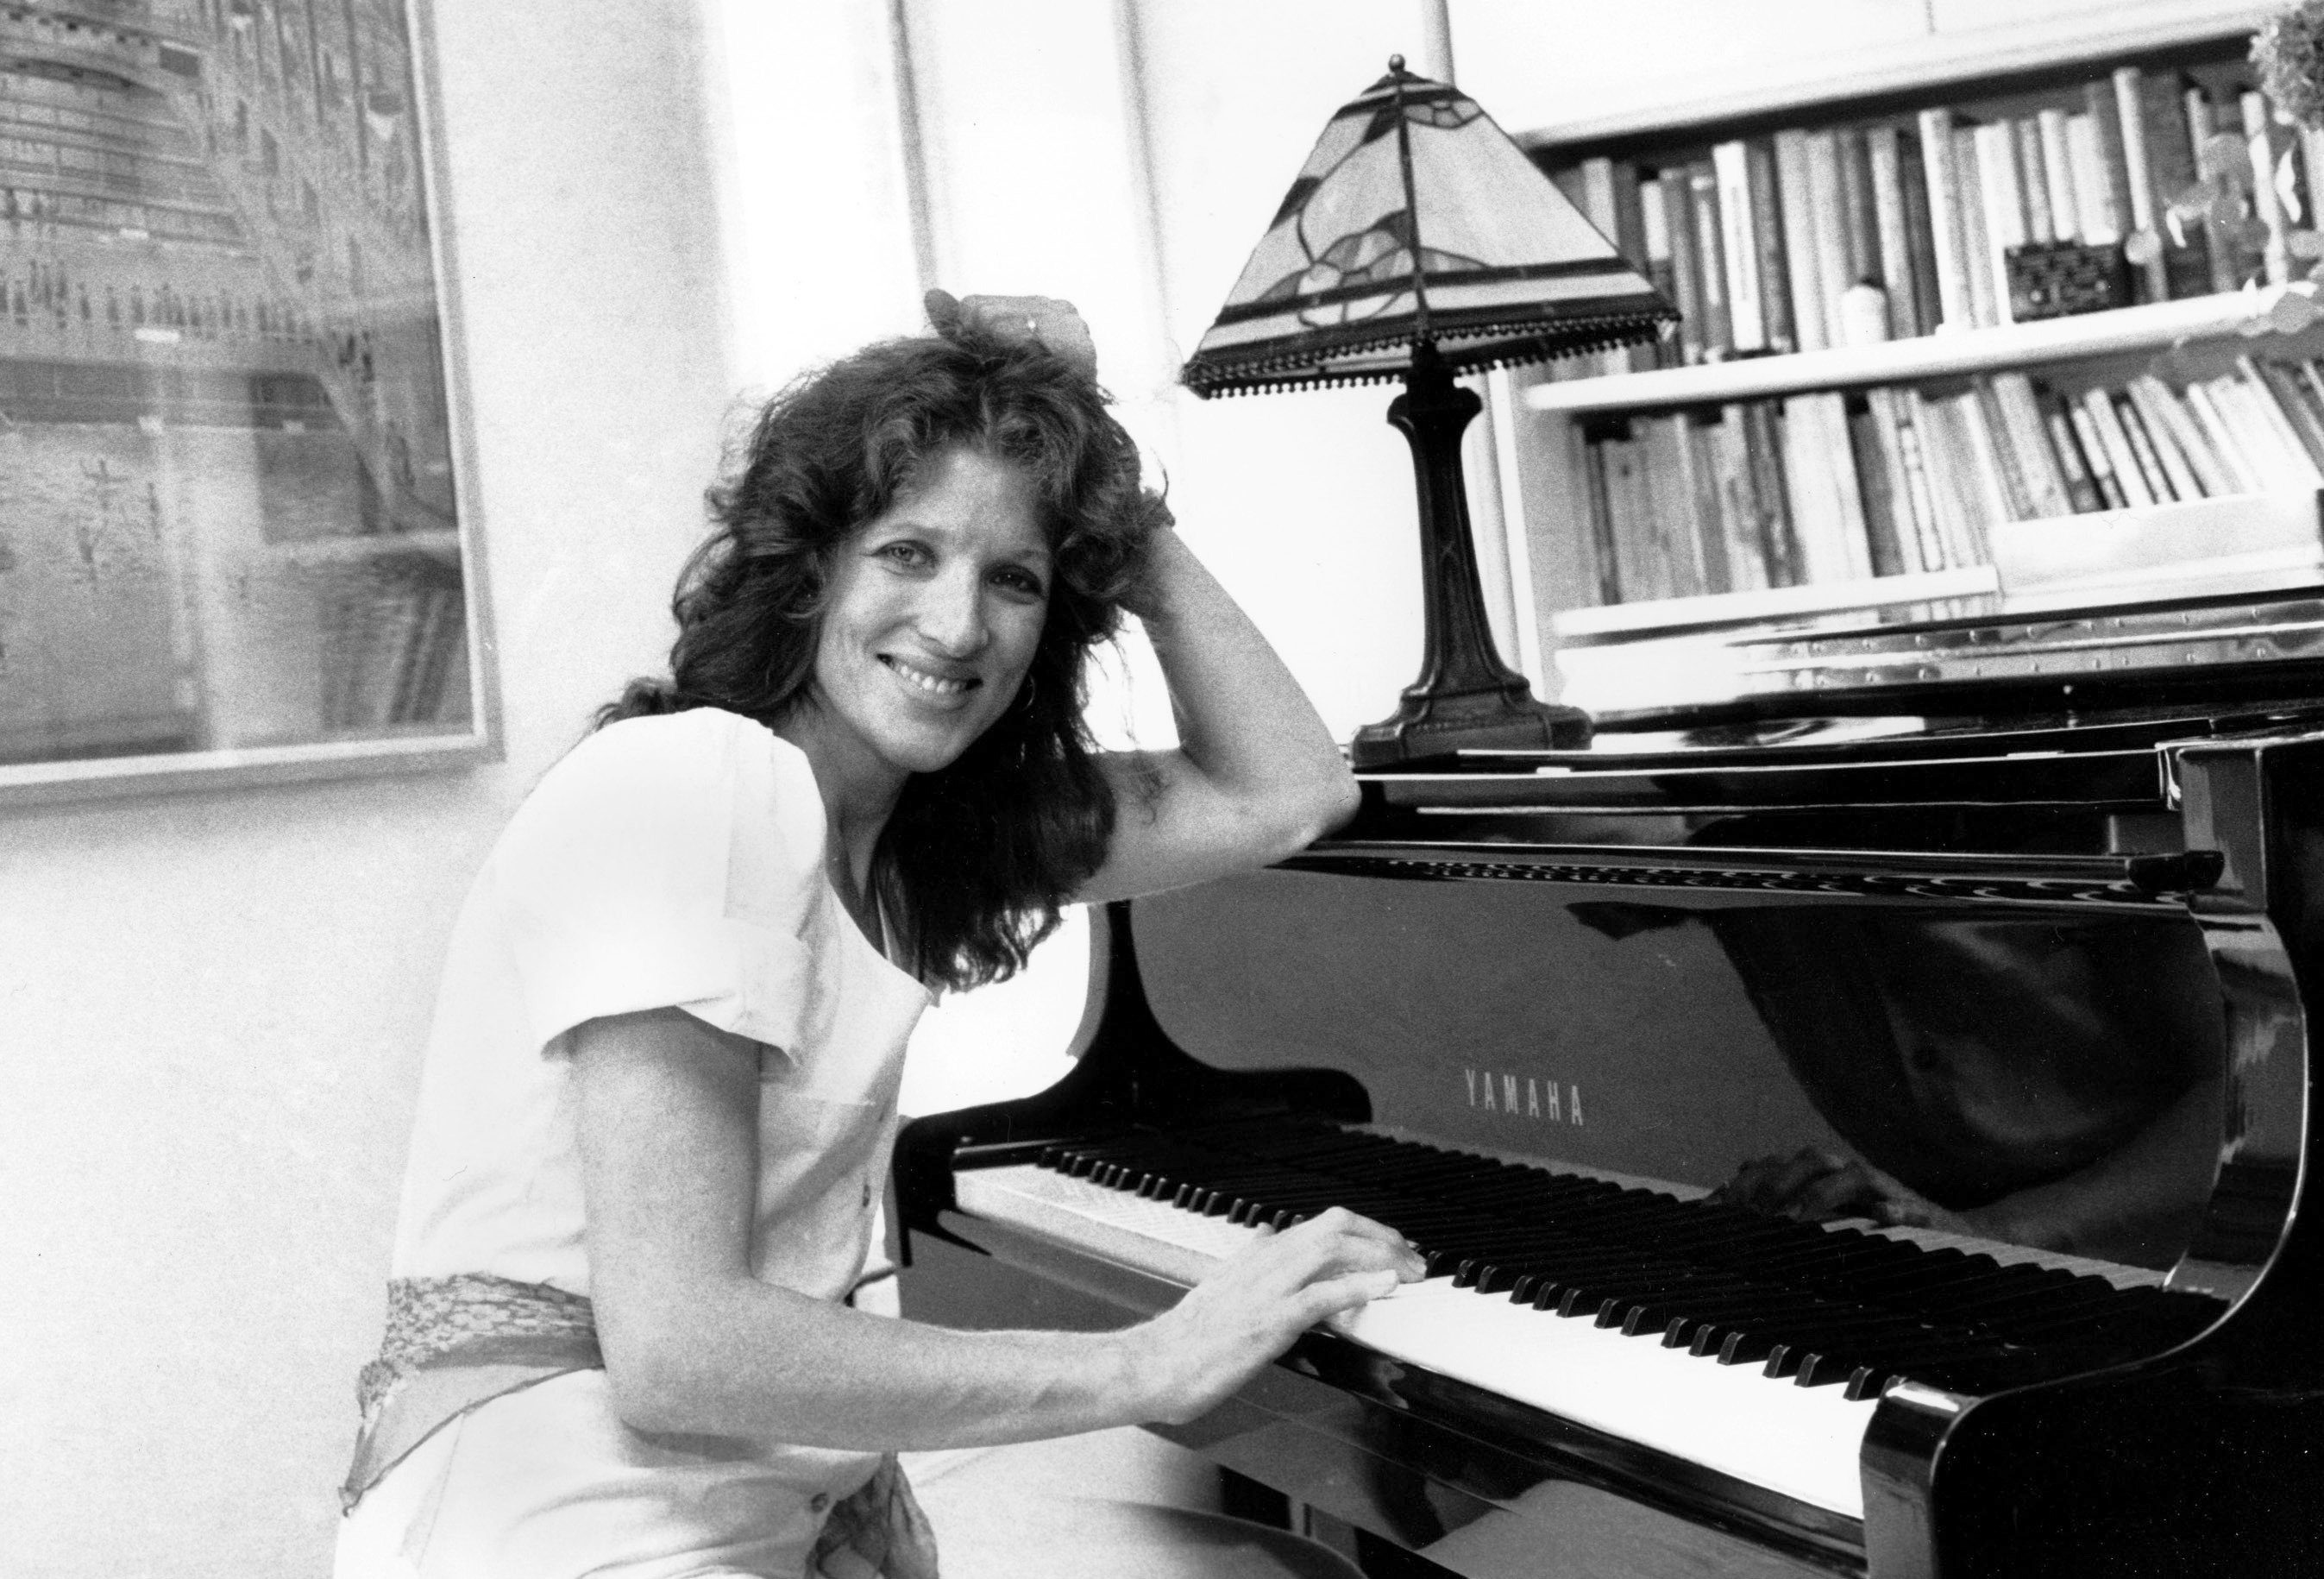 Lucy Simon sits at the piano in her New York apartment on May 28, 1982. Lucy Simon, the composer who received a Tony nomination in 1991 for her work on the long-running Broadway musical “The Secret Garden,” died Thursday at her home in Piedmont, N.Y., after a long battle with breast cancer. She was 82. (AP Photo, File)